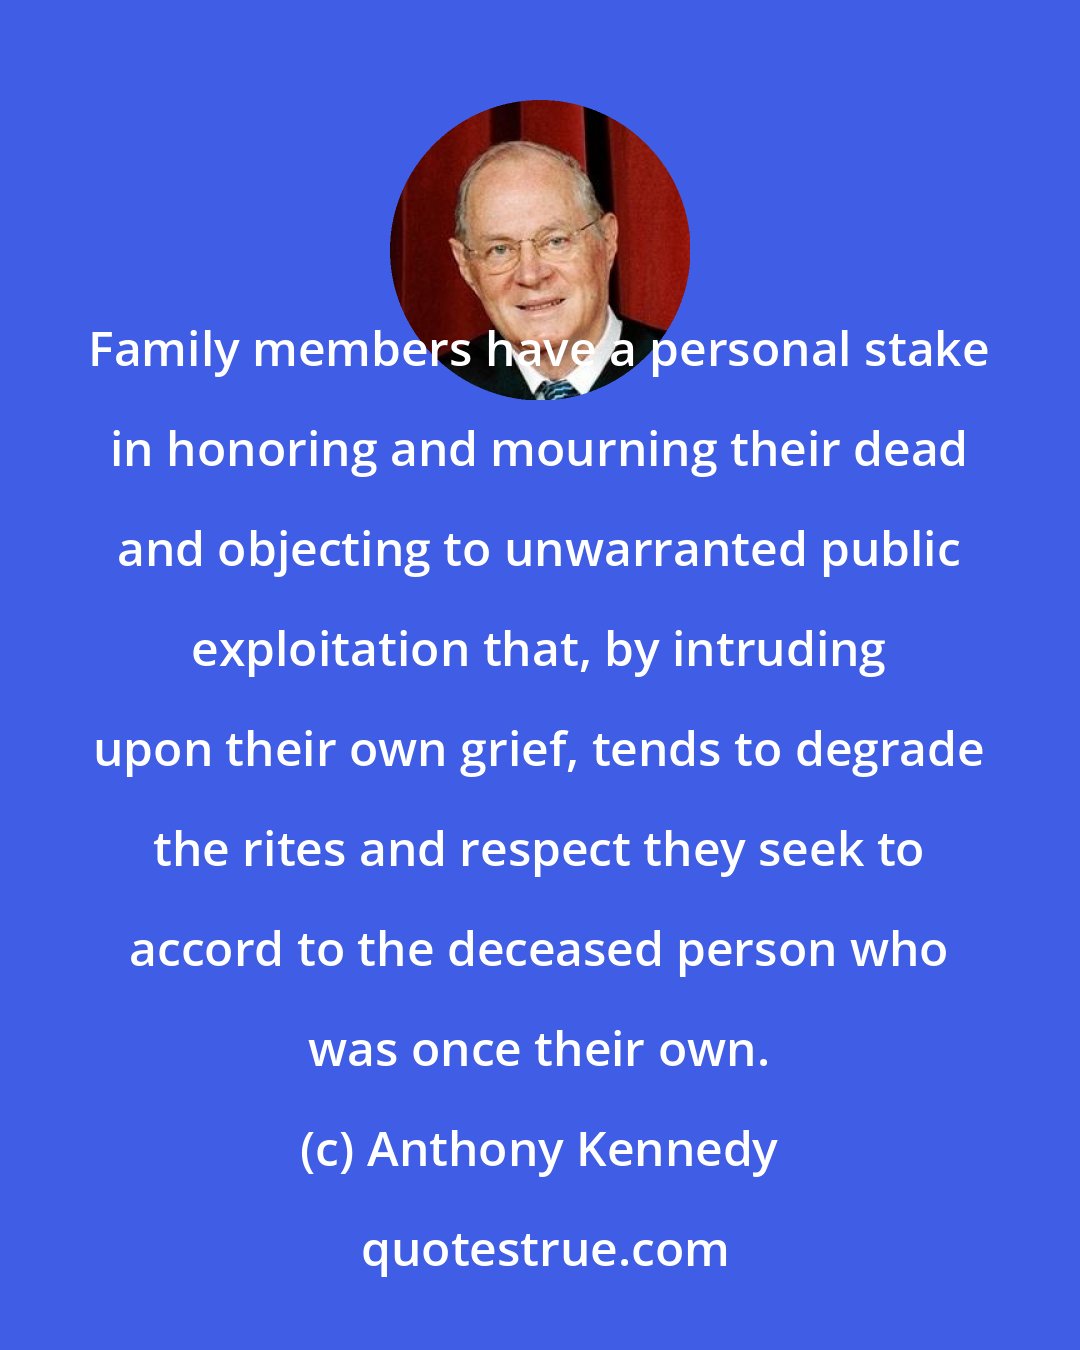 Anthony Kennedy: Family members have a personal stake in honoring and mourning their dead and objecting to unwarranted public exploitation that, by intruding upon their own grief, tends to degrade the rites and respect they seek to accord to the deceased person who was once their own.